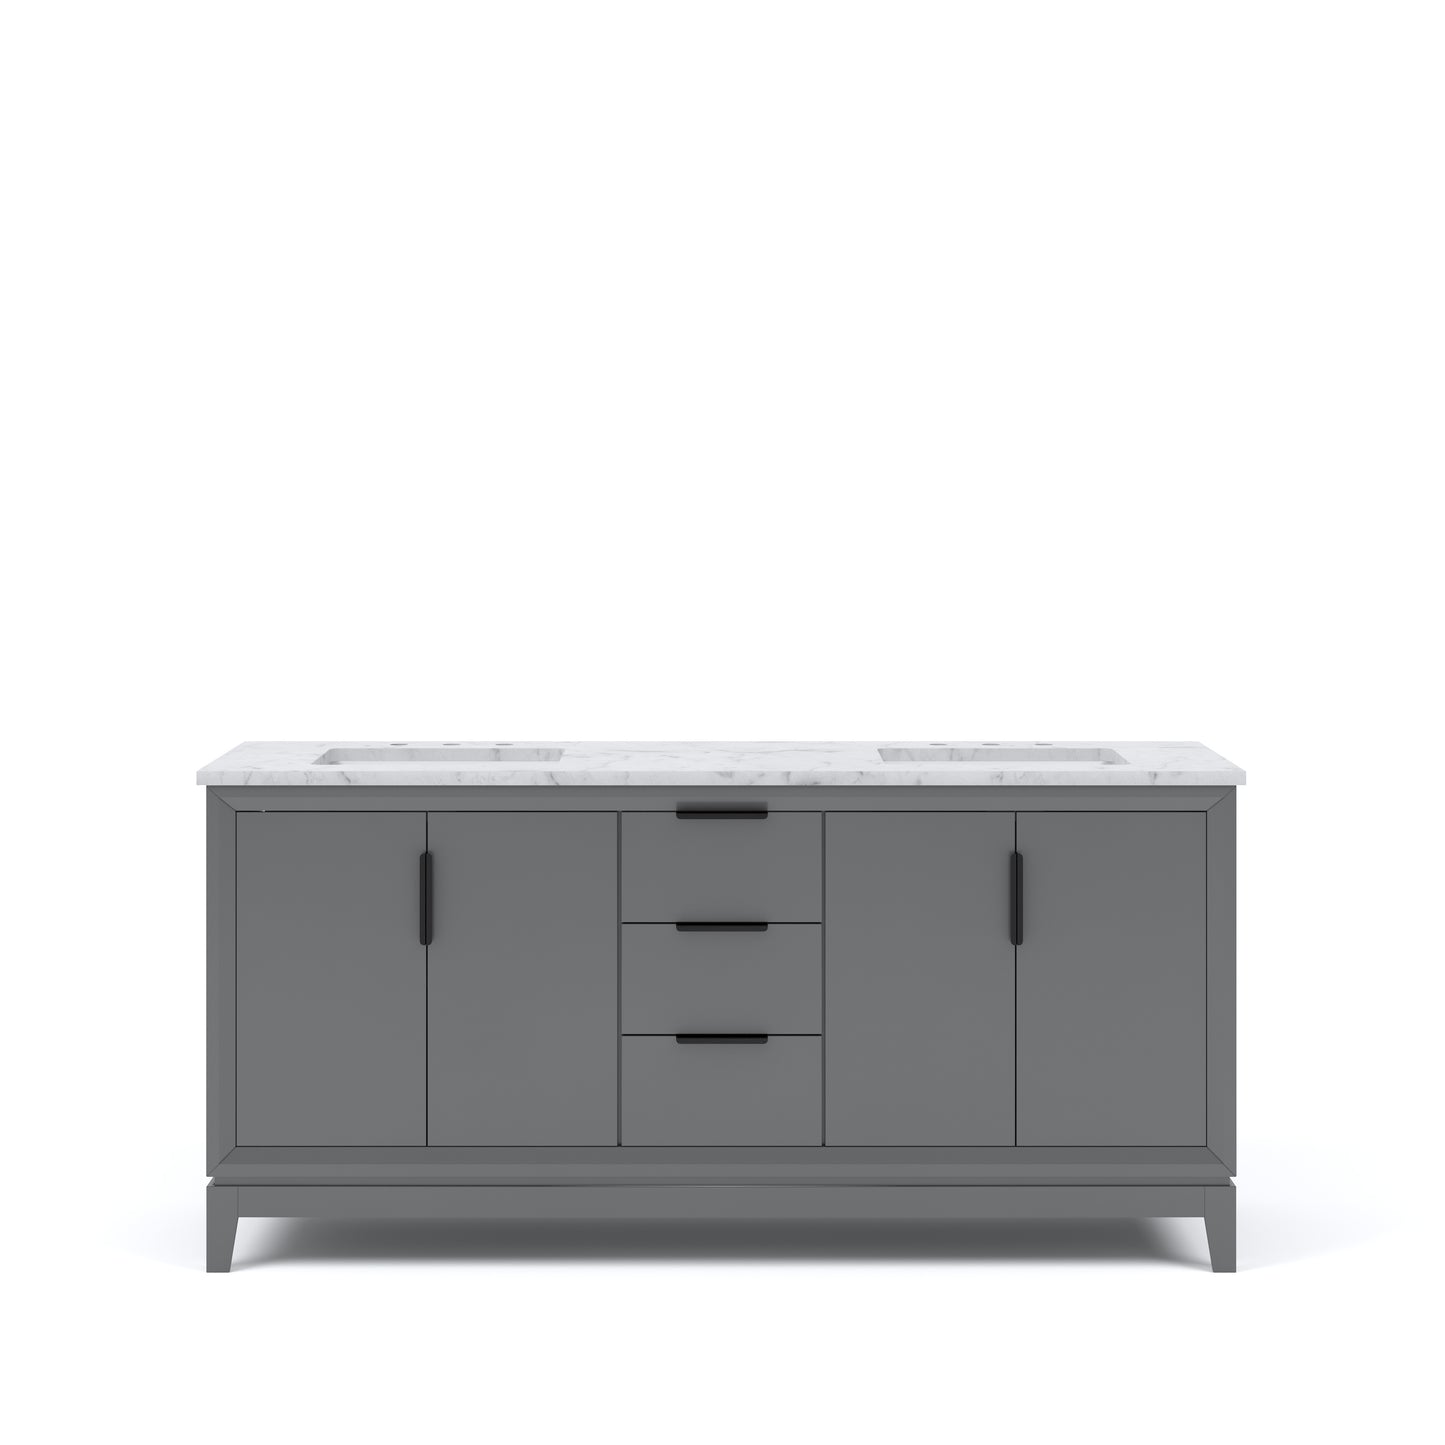 ELIZABETH 72"W x 34.25"H Cashmere Gray Double-Sink Vanity with Carrara White Marble Countertop